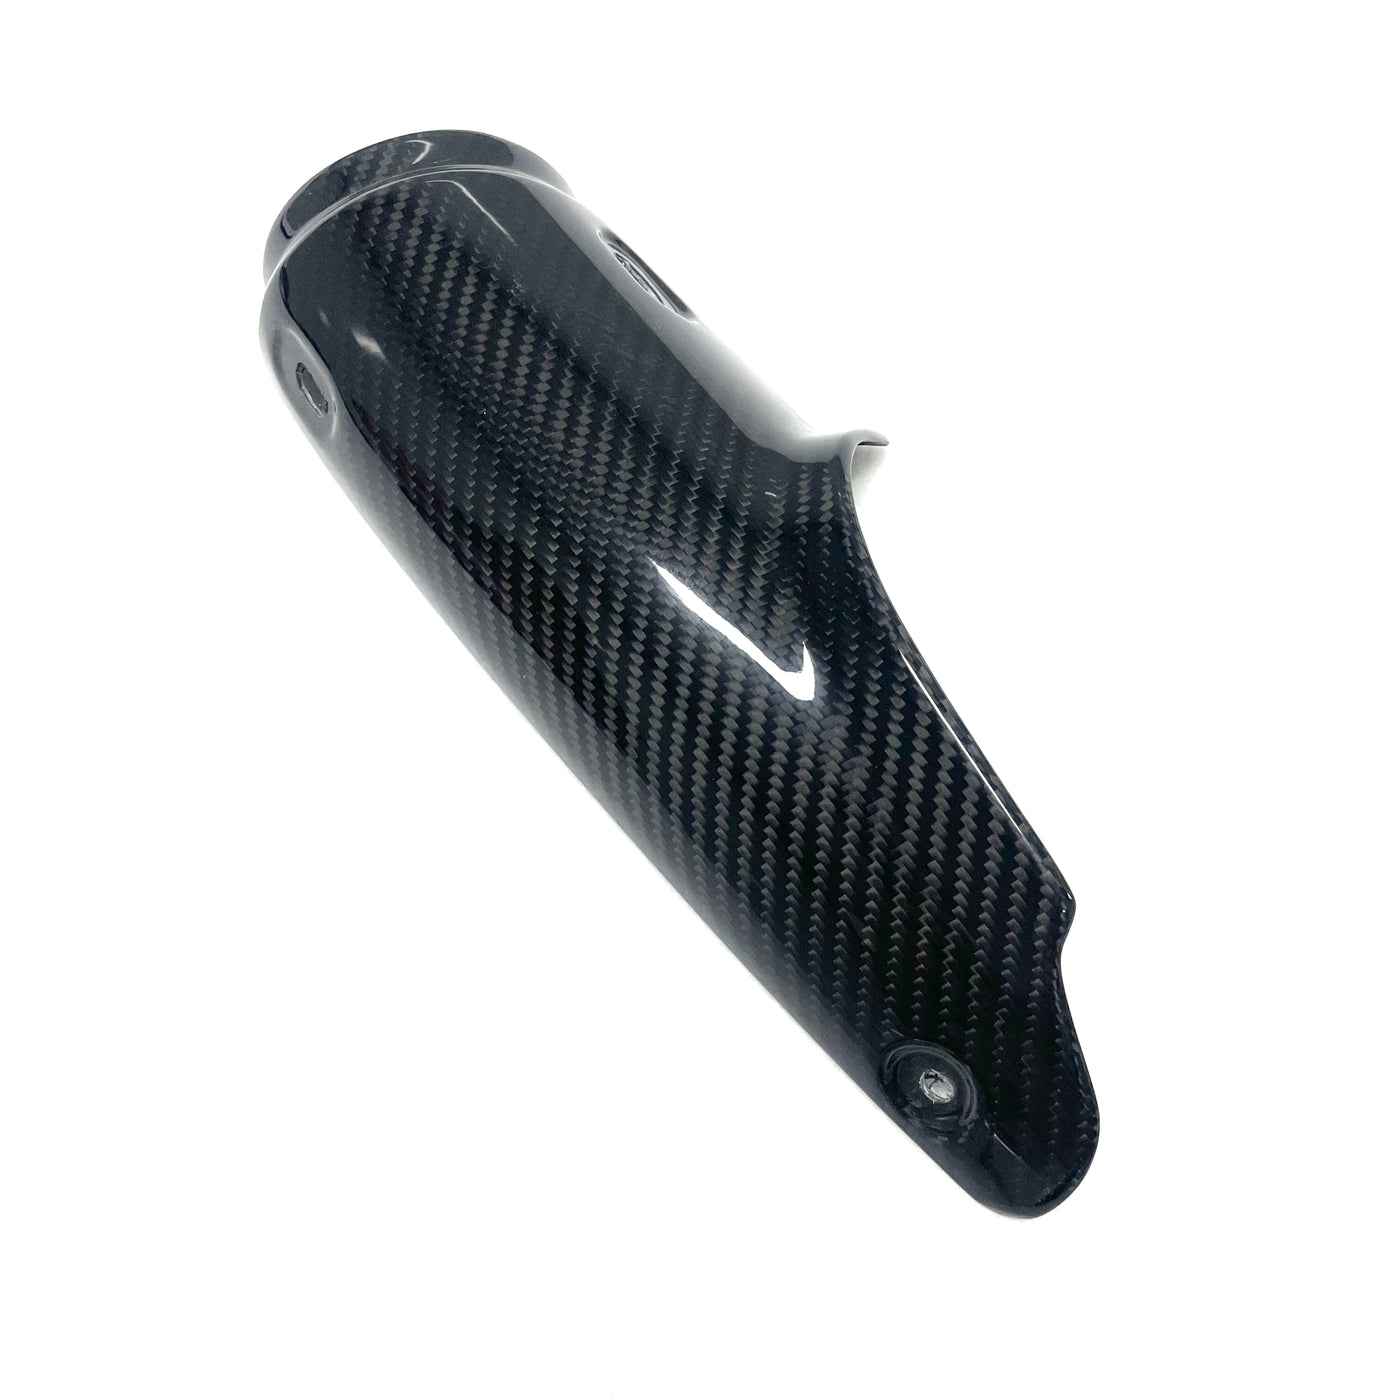 Real carbon fiber Exhaust pipe cover for BMW R1250GS-ADV